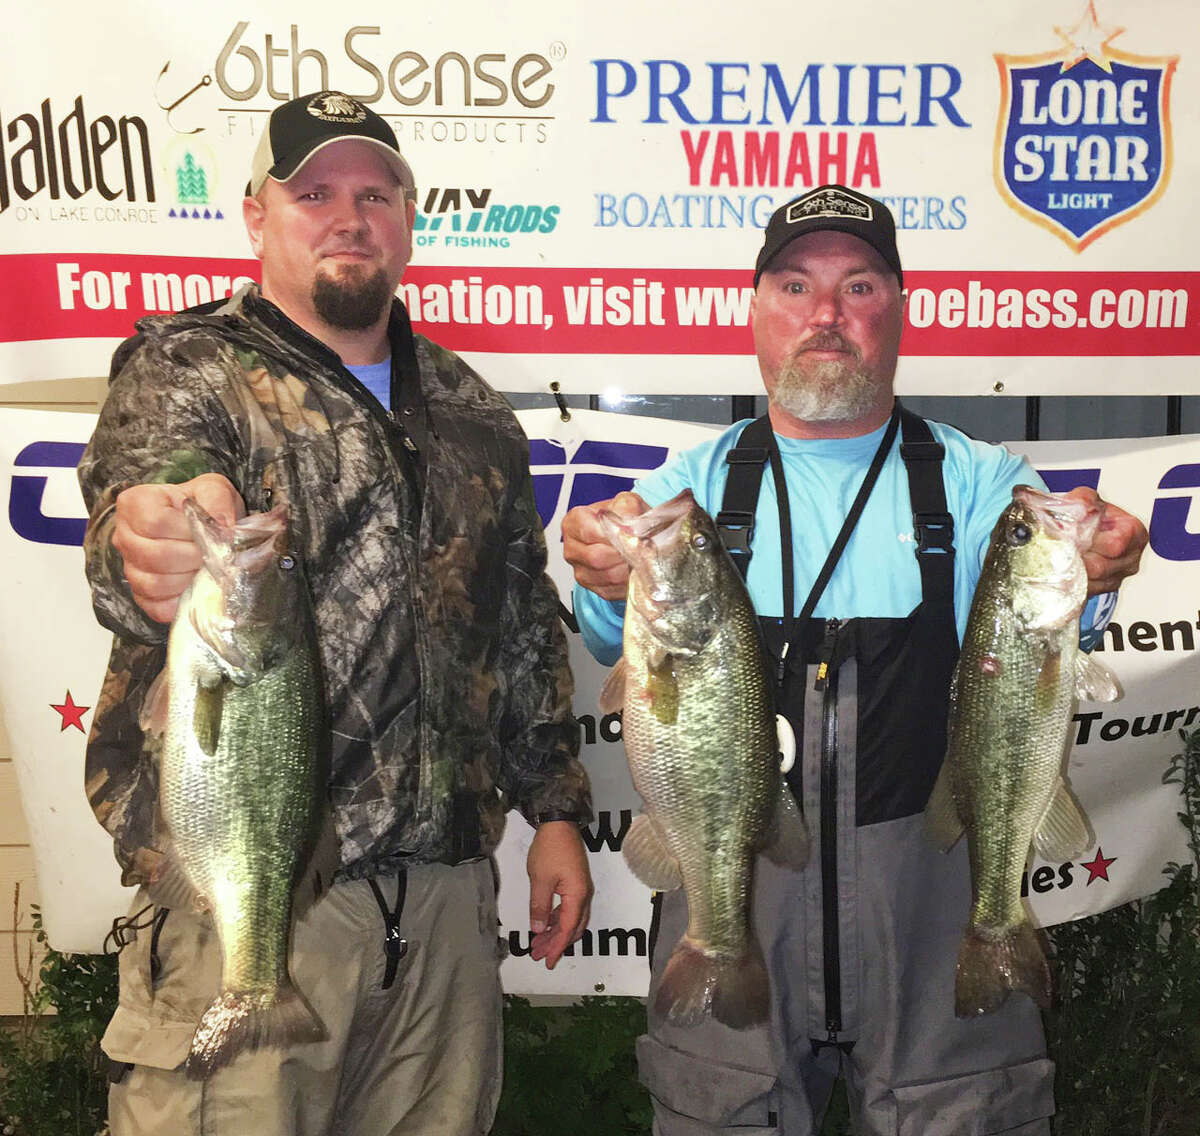 Steve Lee and Aaron Schultz came in fourth place in the CONROEBASS Tuesday Night Tournament with a weight of 8.22 pounds.